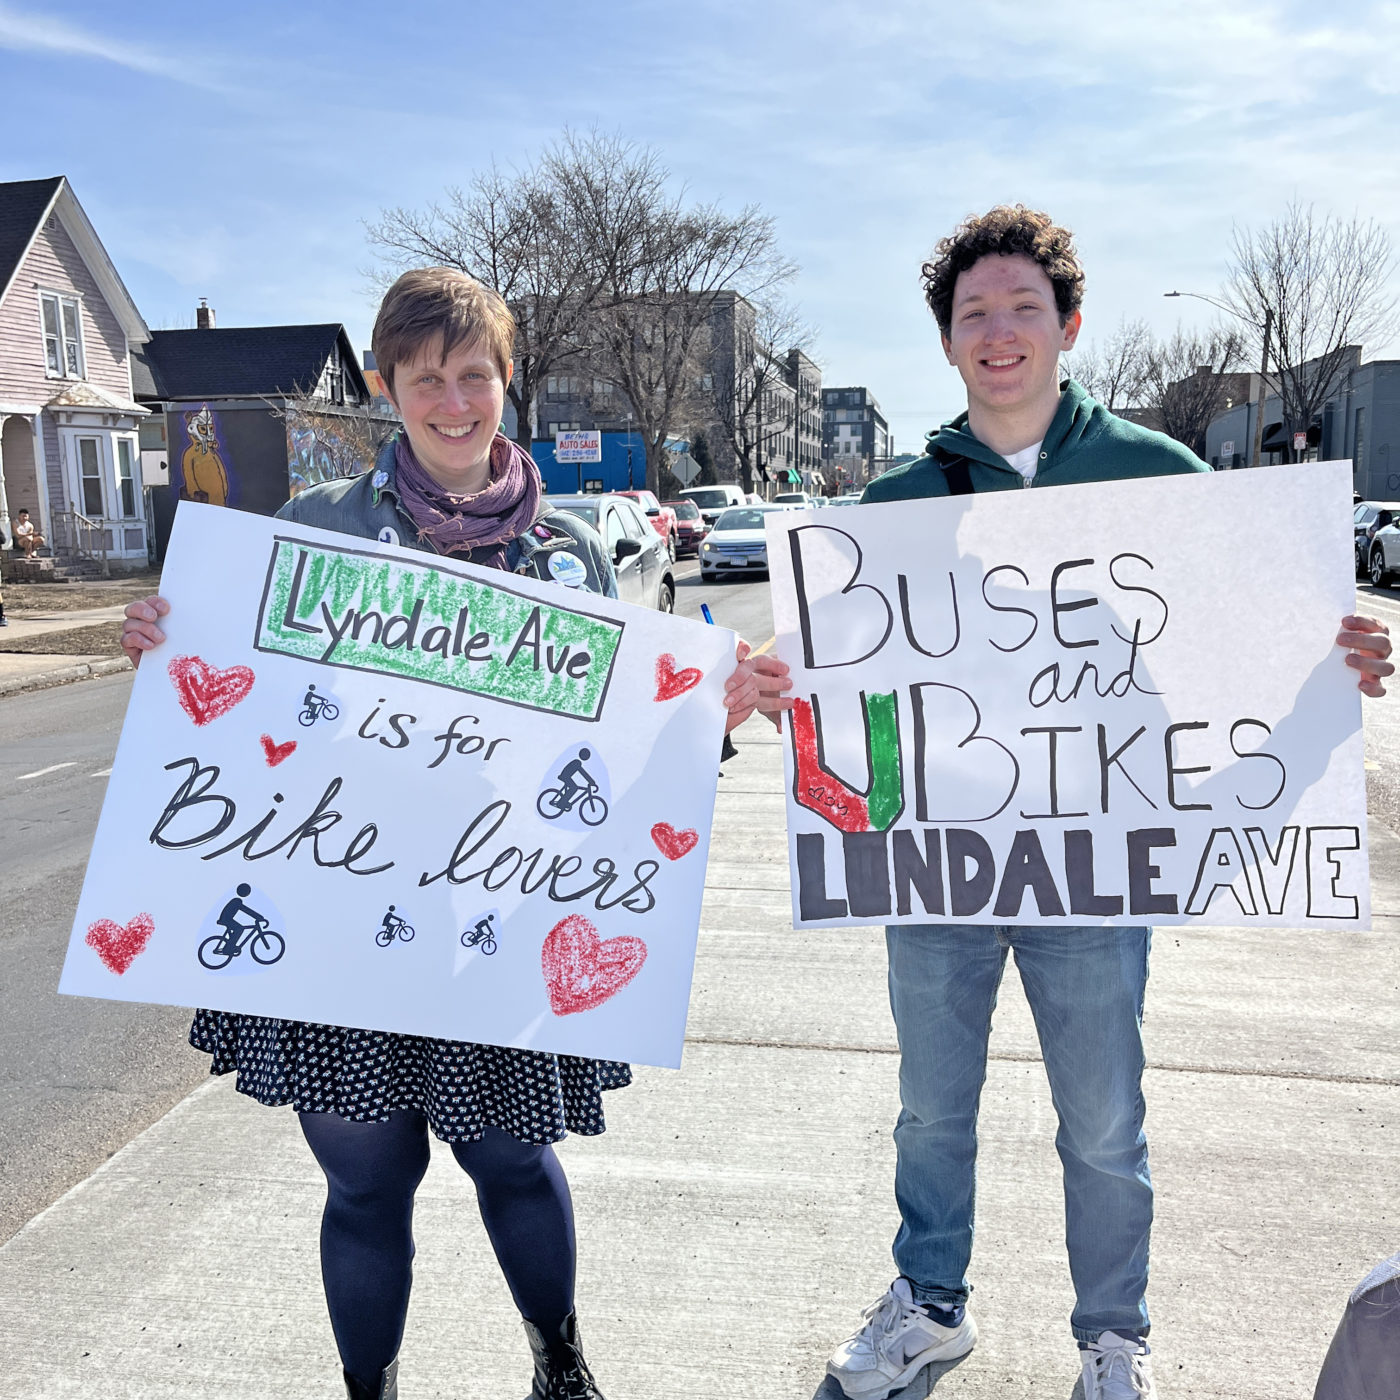 Two community members, including Asa Stanfield, hold signs in the median at 27th and Lyndale that say Lyndale Ave is for Bike Lovers" and "Buses and Bikes on Lyndale Avenue"